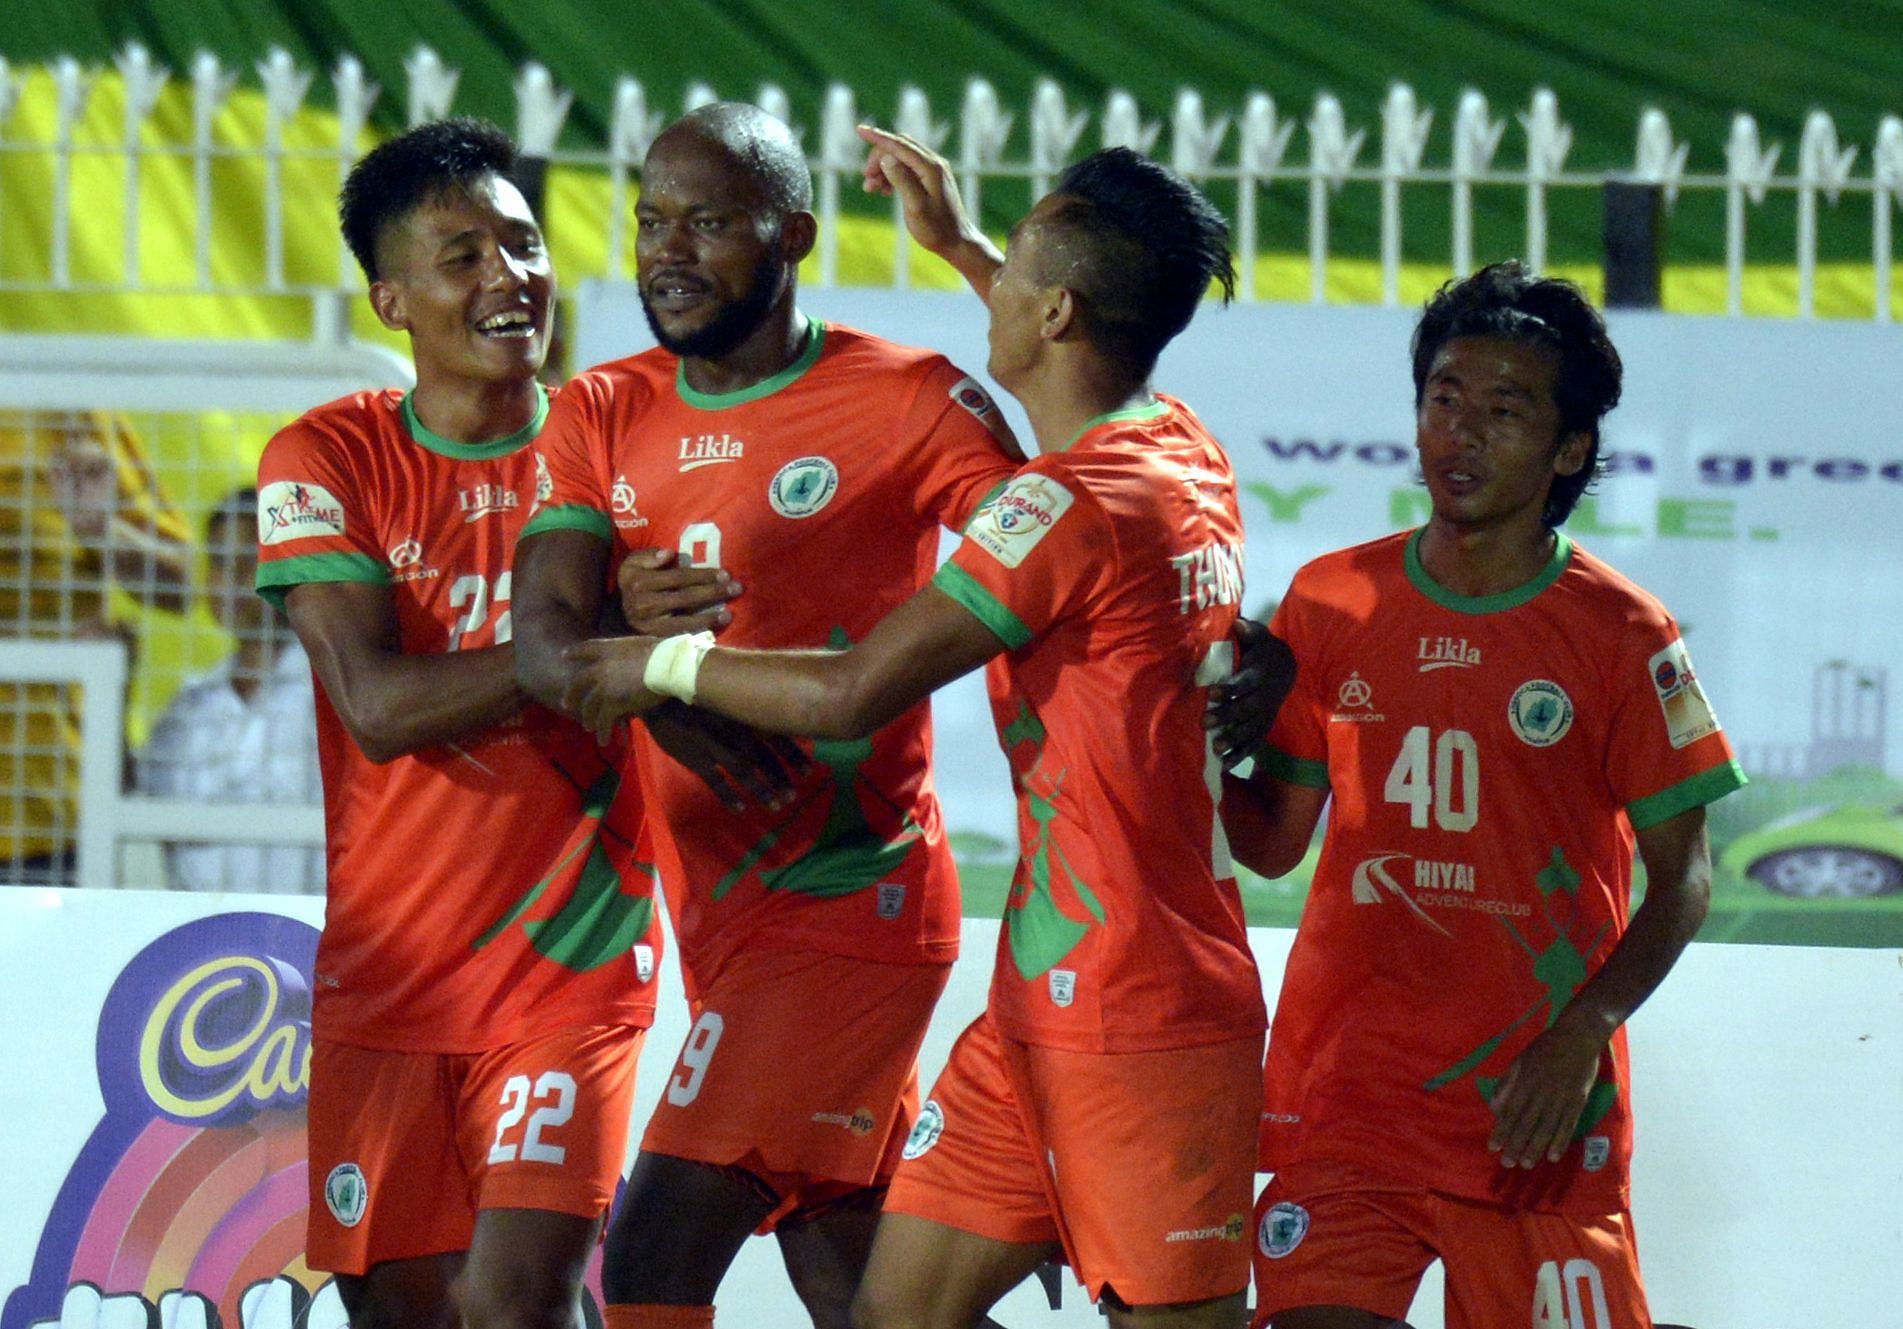 NEROCA FC players celebrate during their win against TRAU FC. [Credits: Suman Chattopadhyay/www.imagesolutionr.in]